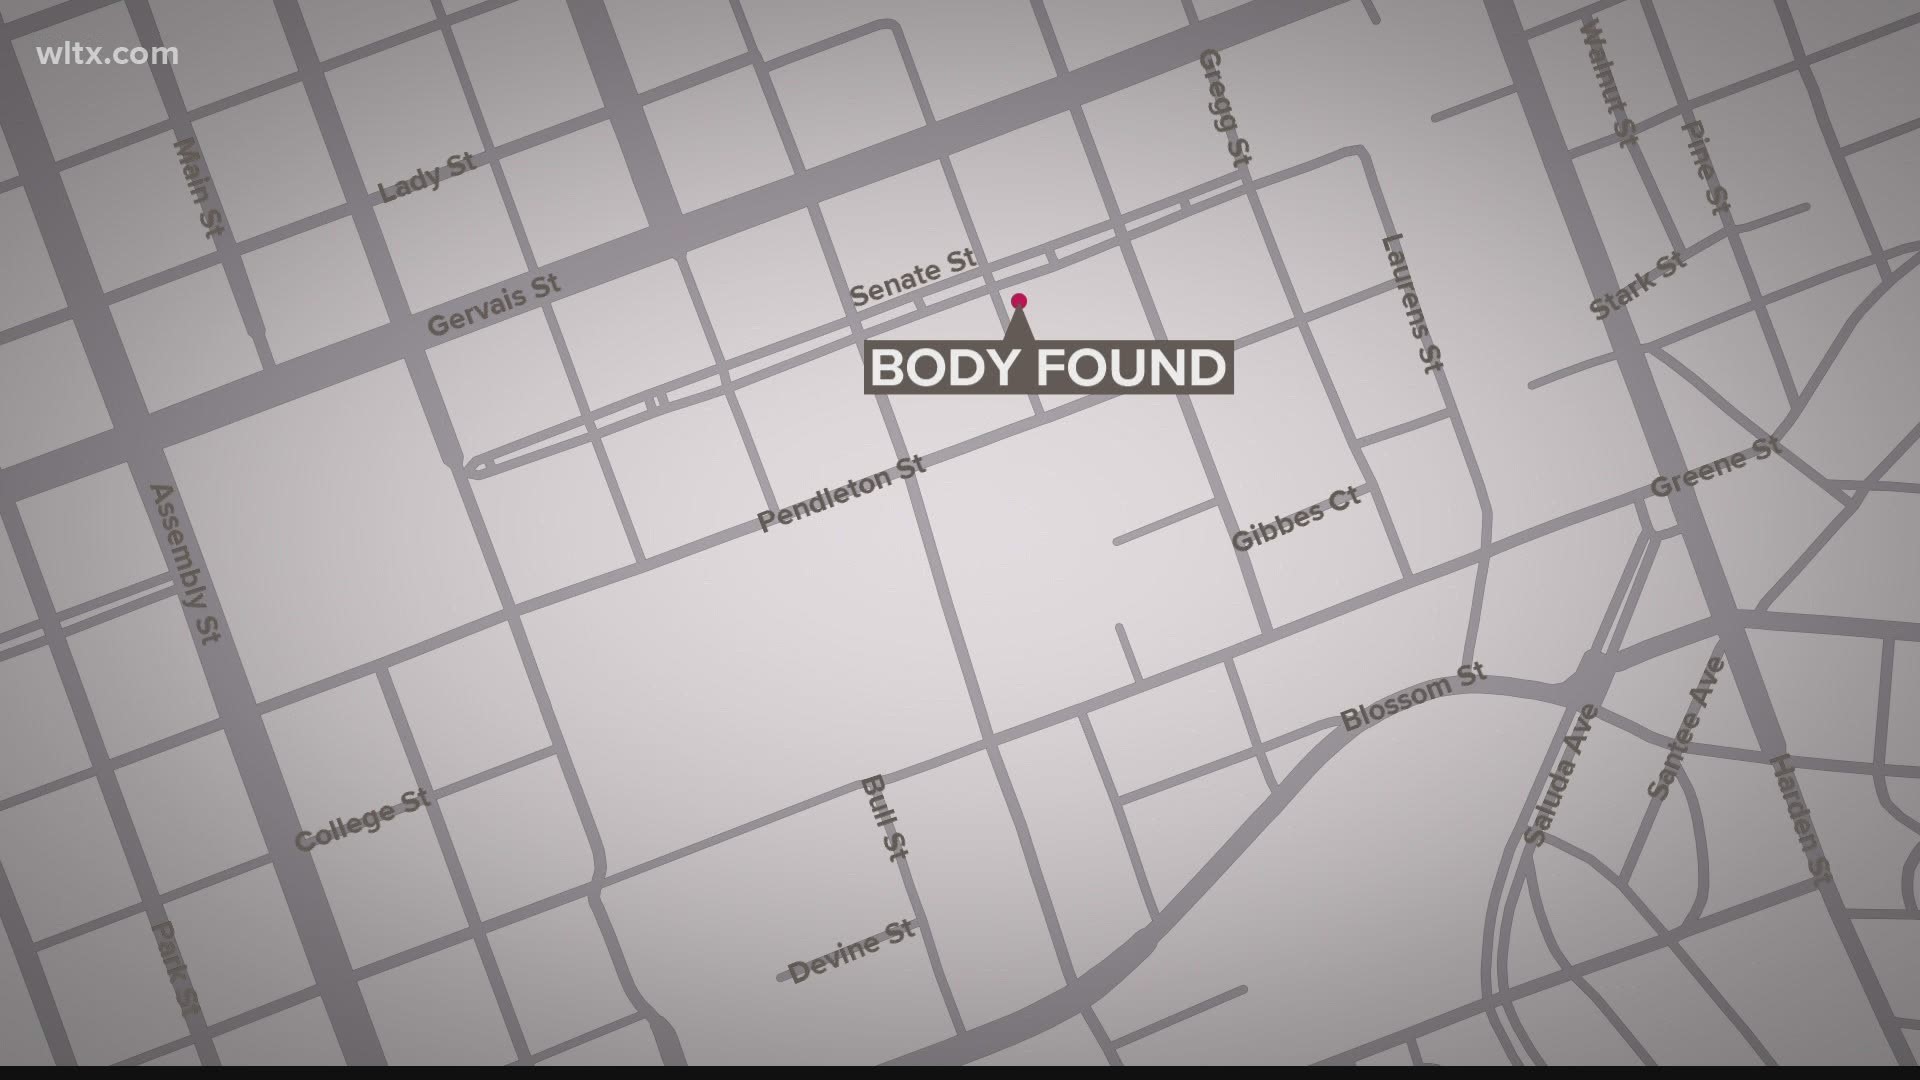 Body of man found near Senate and Henderson streets in downtown Columbia